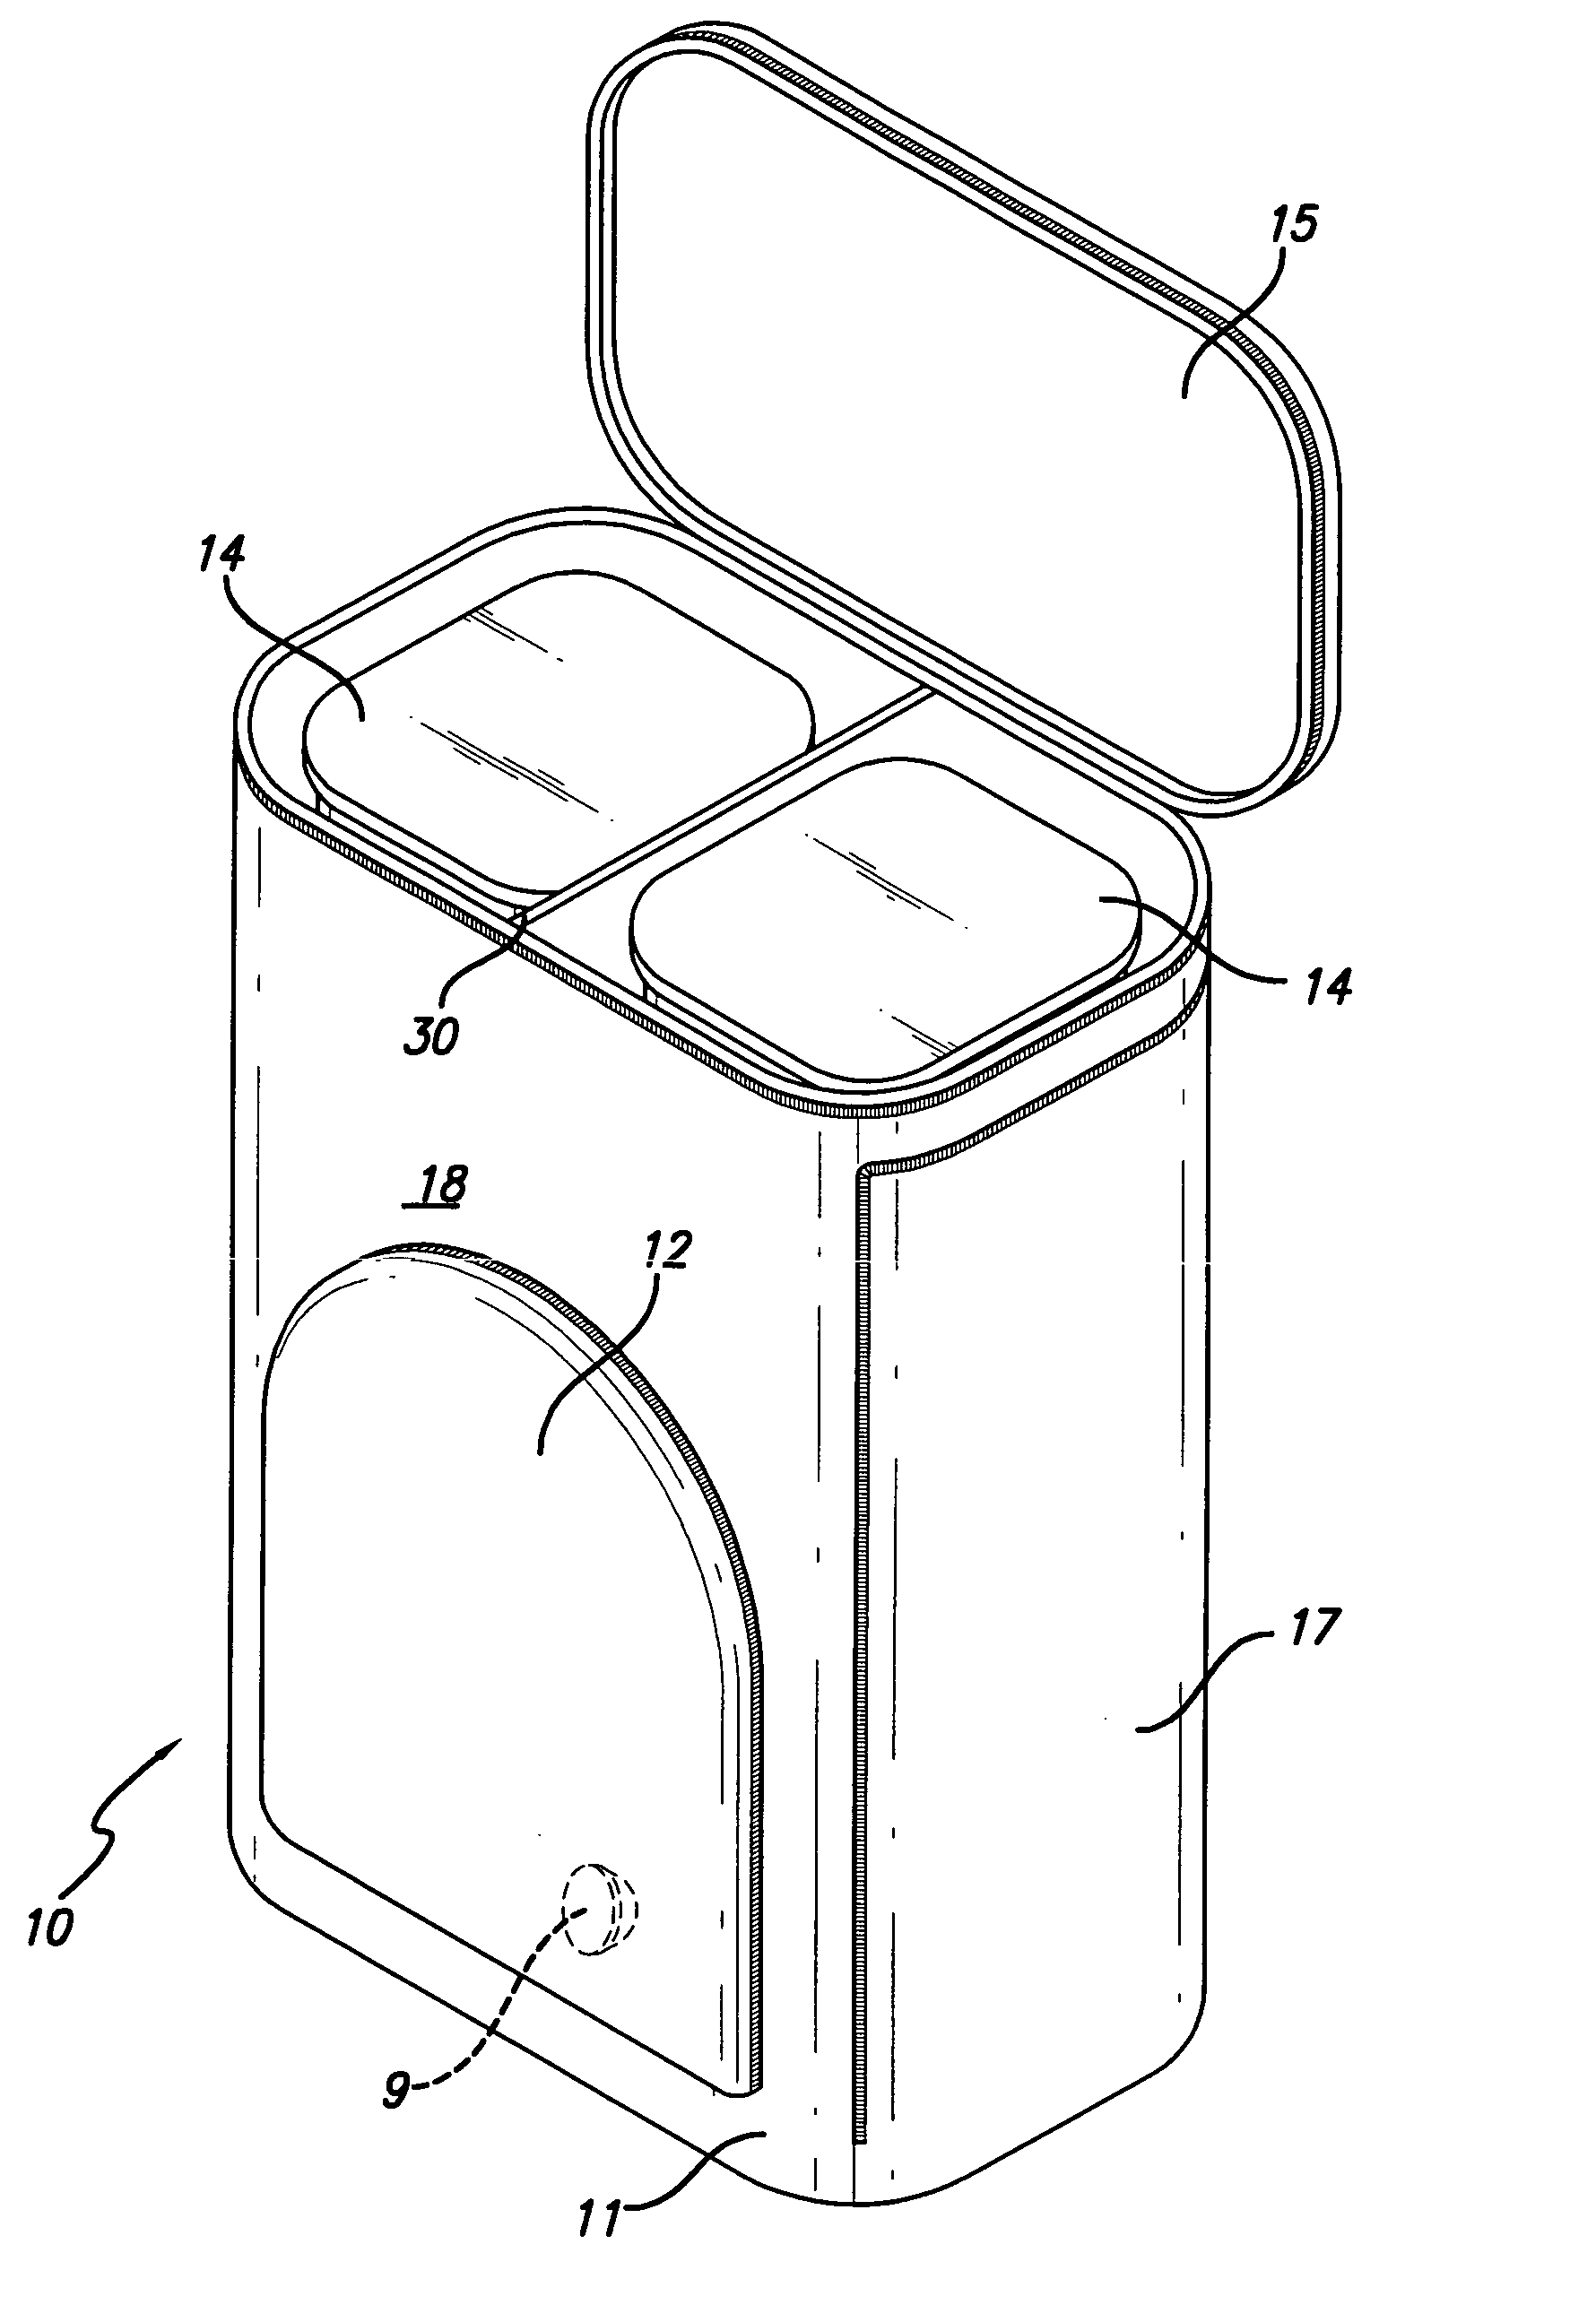 Modular apparatus and method for nutrition system utilizing portions determined by the eater's weight